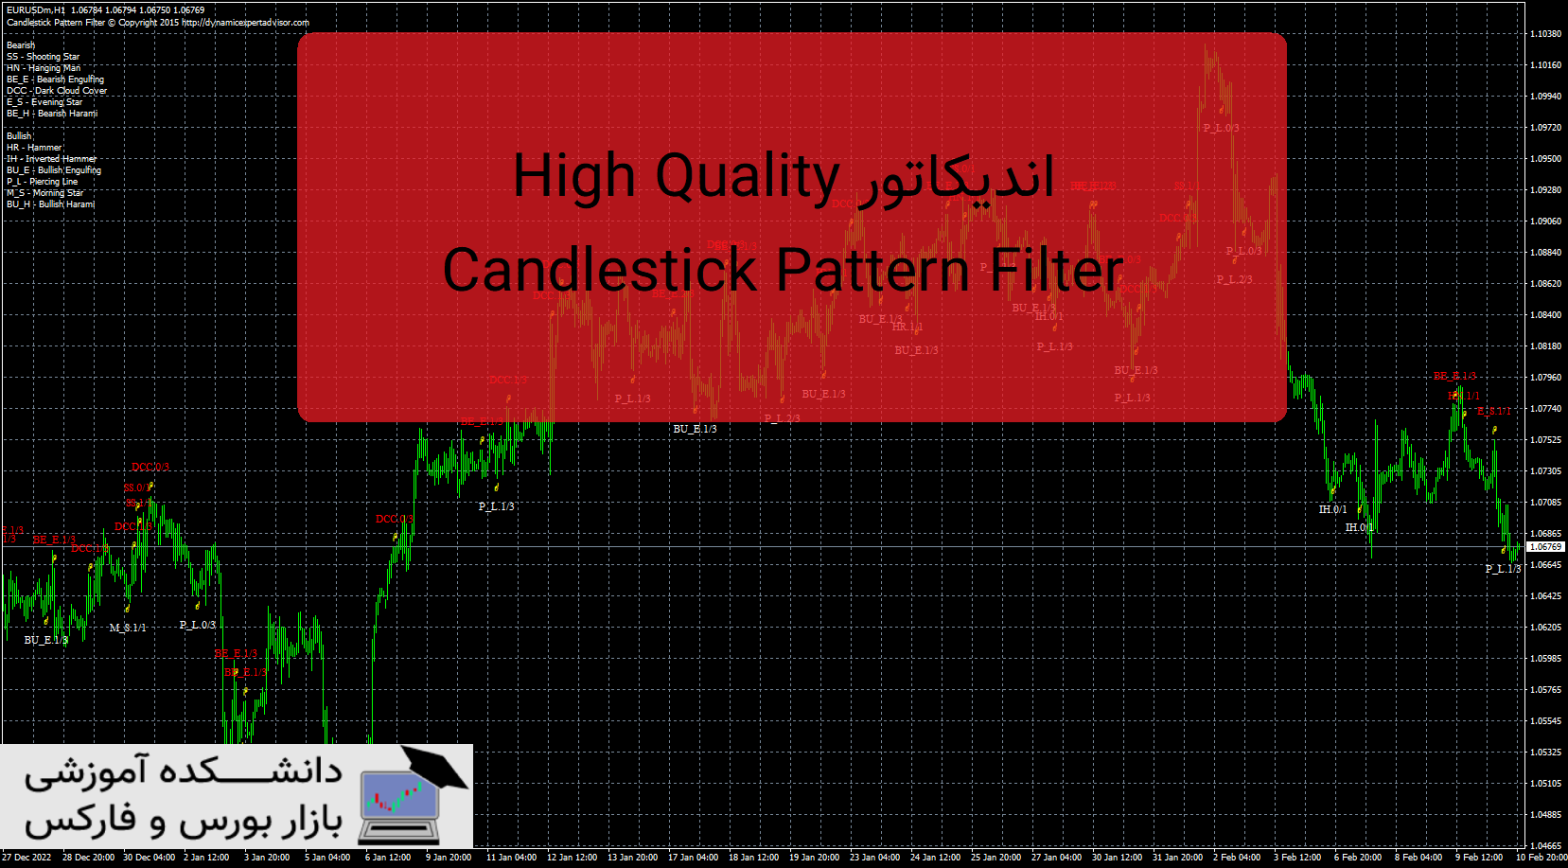 High Quality Candlestick Pattern Filter اندیکاتور